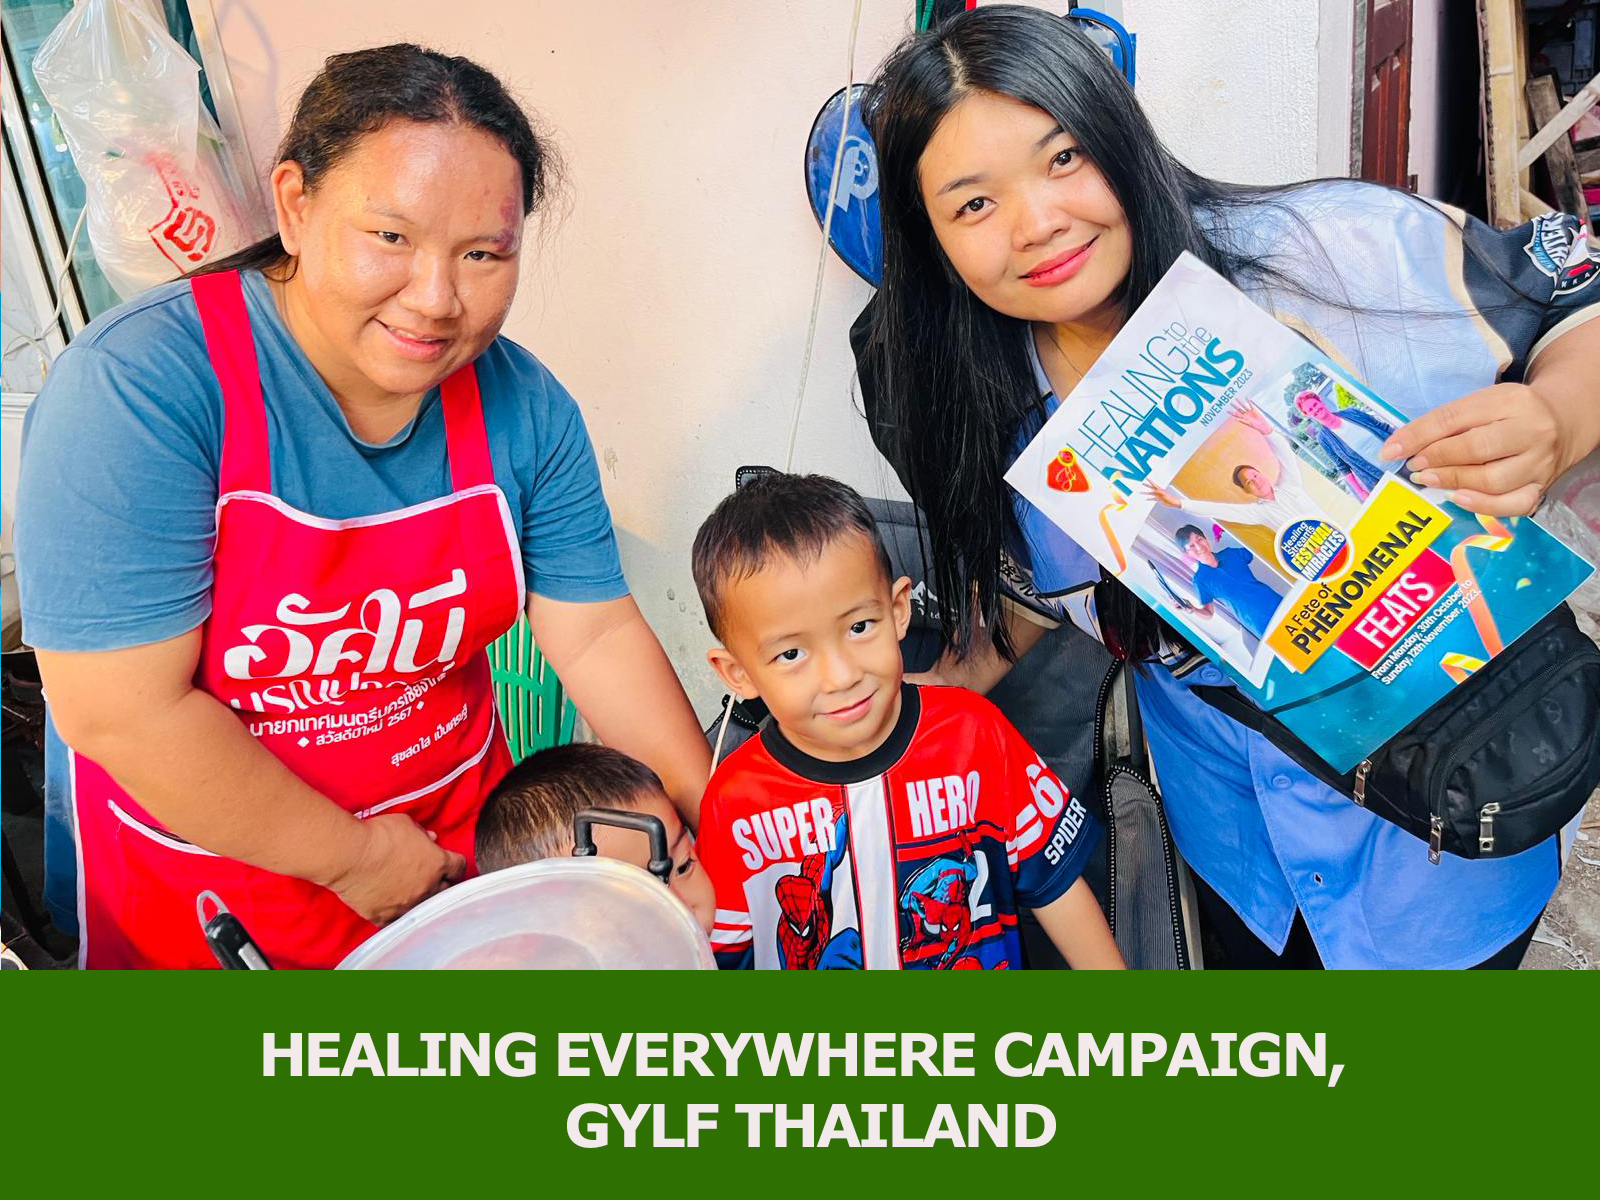 MORE PICTURE REPORT FROM THE HEALING EVERYWHERE CAMPAIGN IN CHANG MAI, THAILAND 